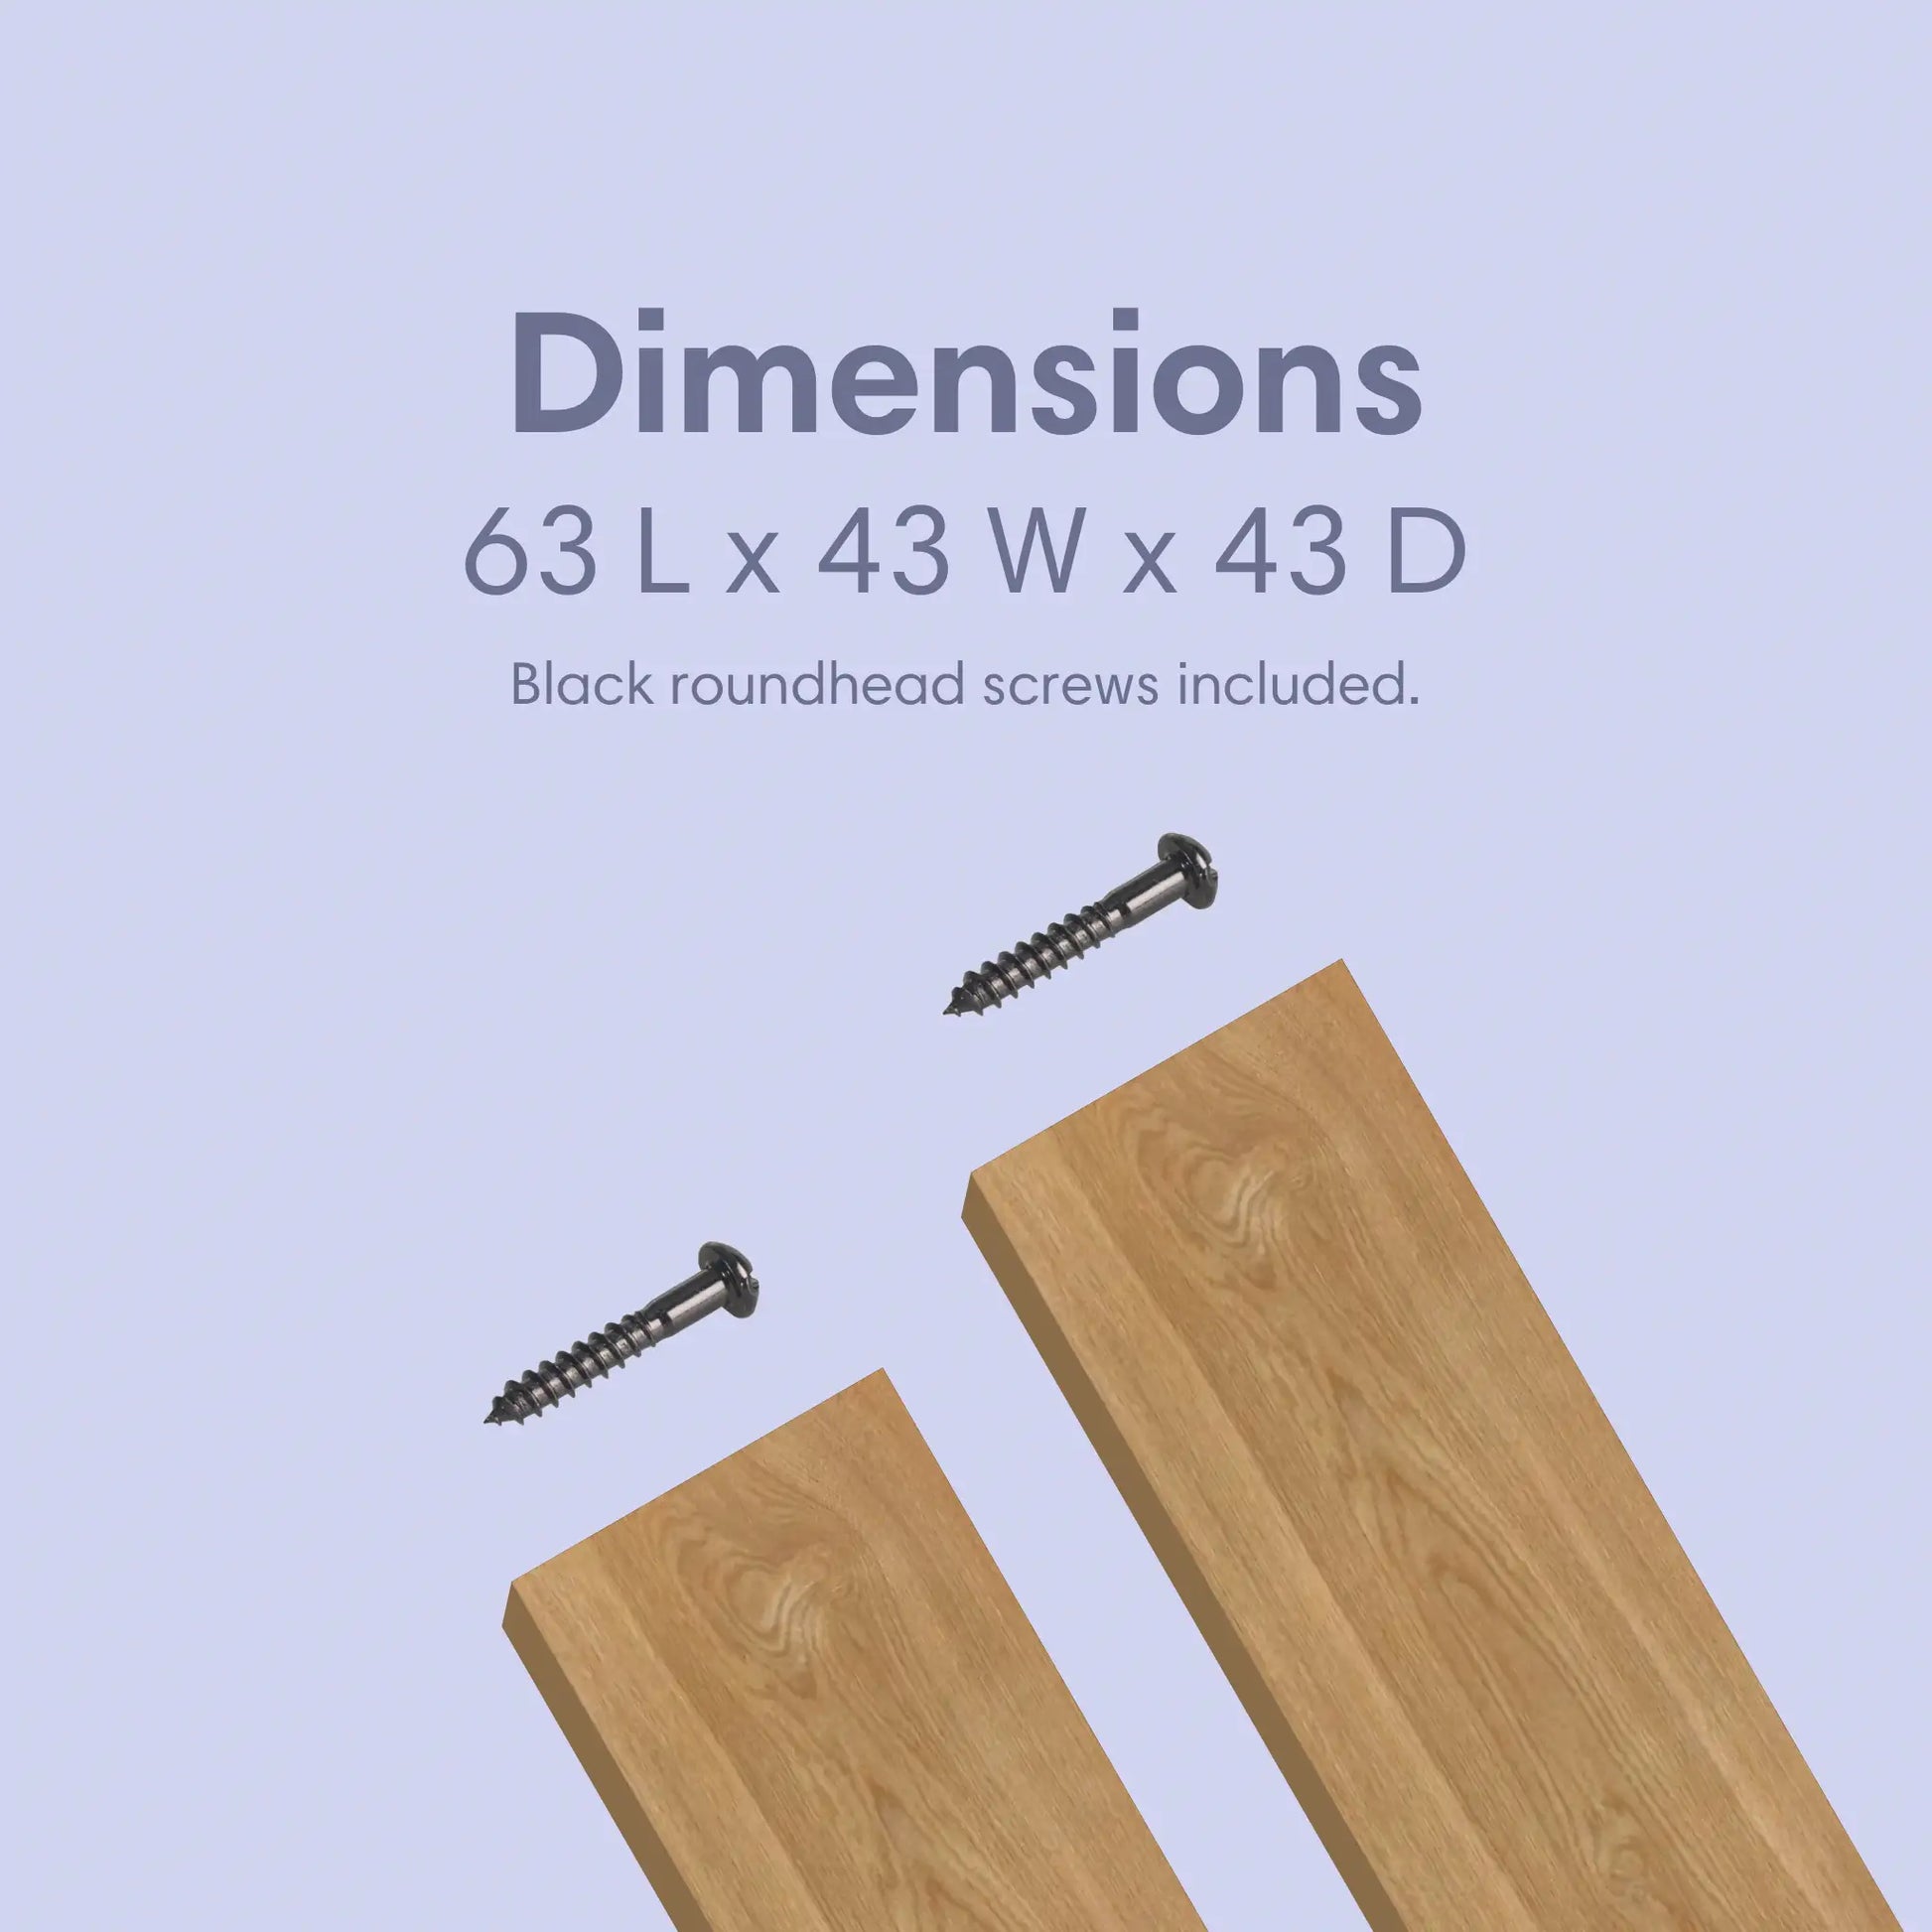 the dimensions of our wooden posts is 63 mm long, 43 mm wide and 43 mm deep